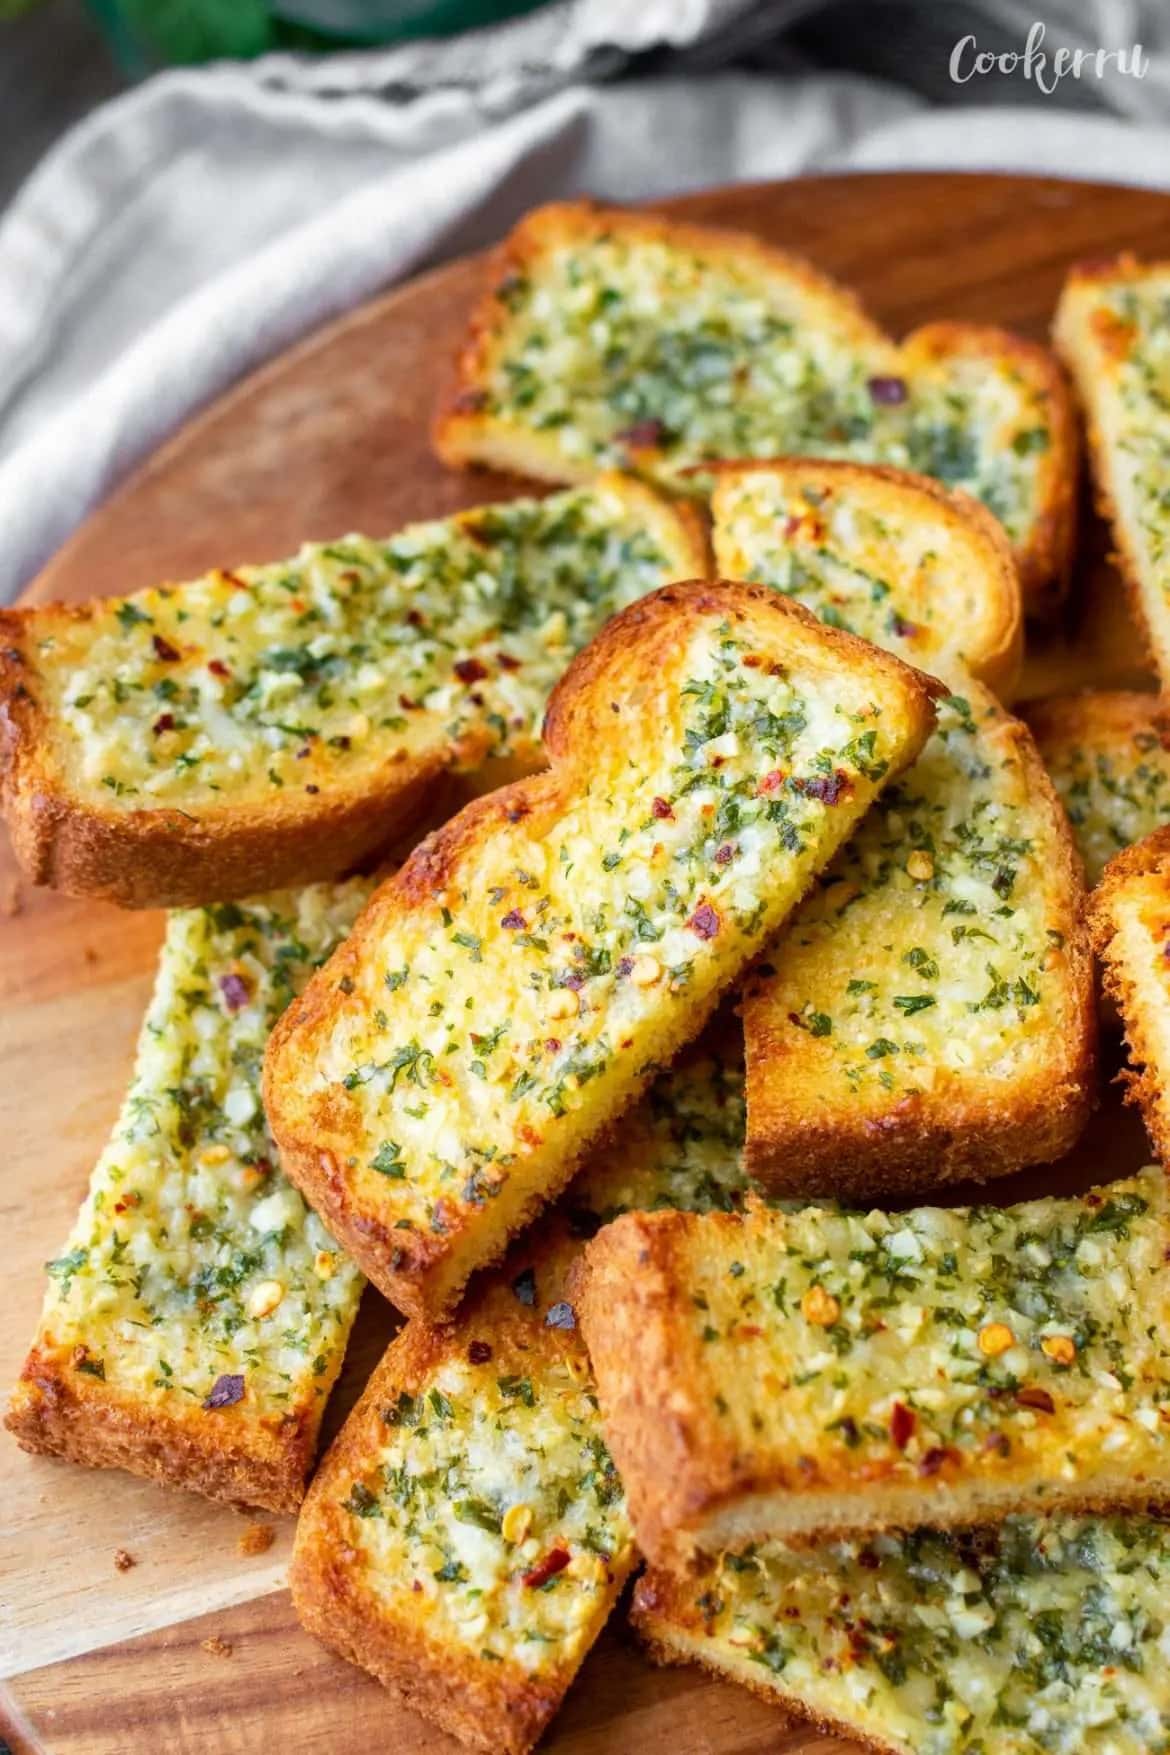 Baked slices of bread  on a wooden board with butter garlic spread on top.